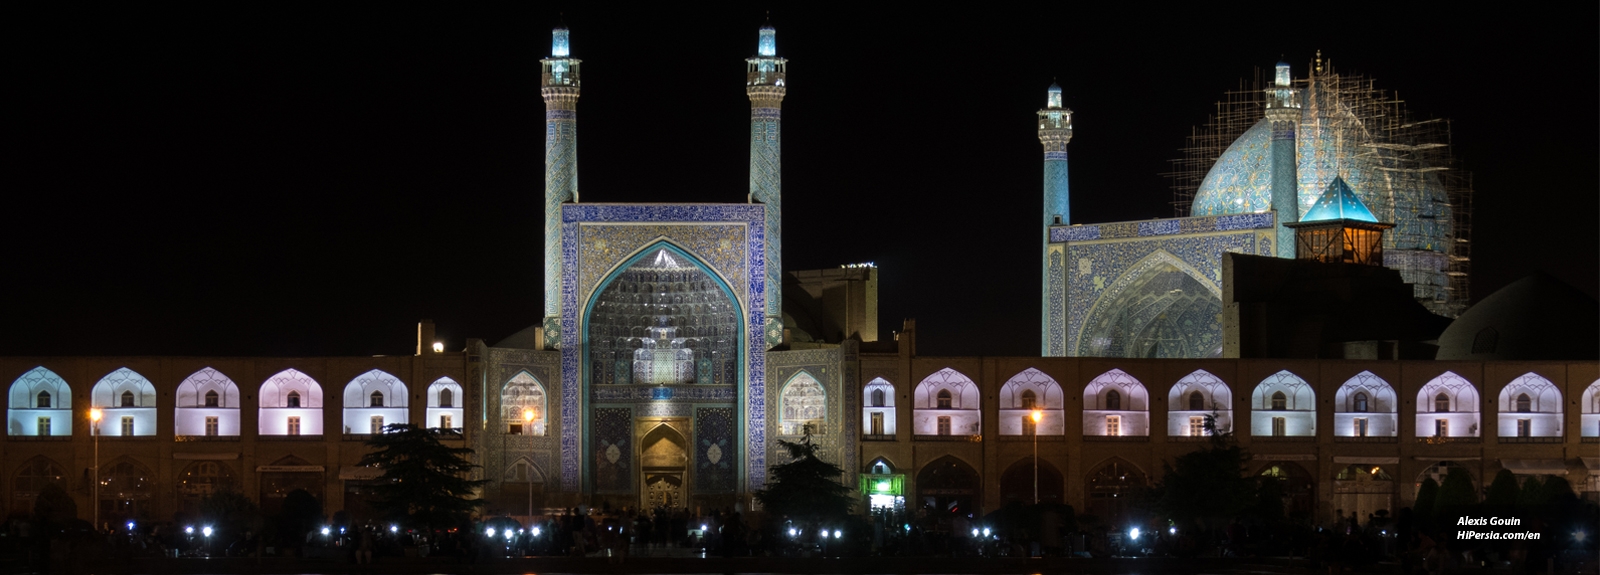 Imam Mosque (Shah Mosque) in Isfahan